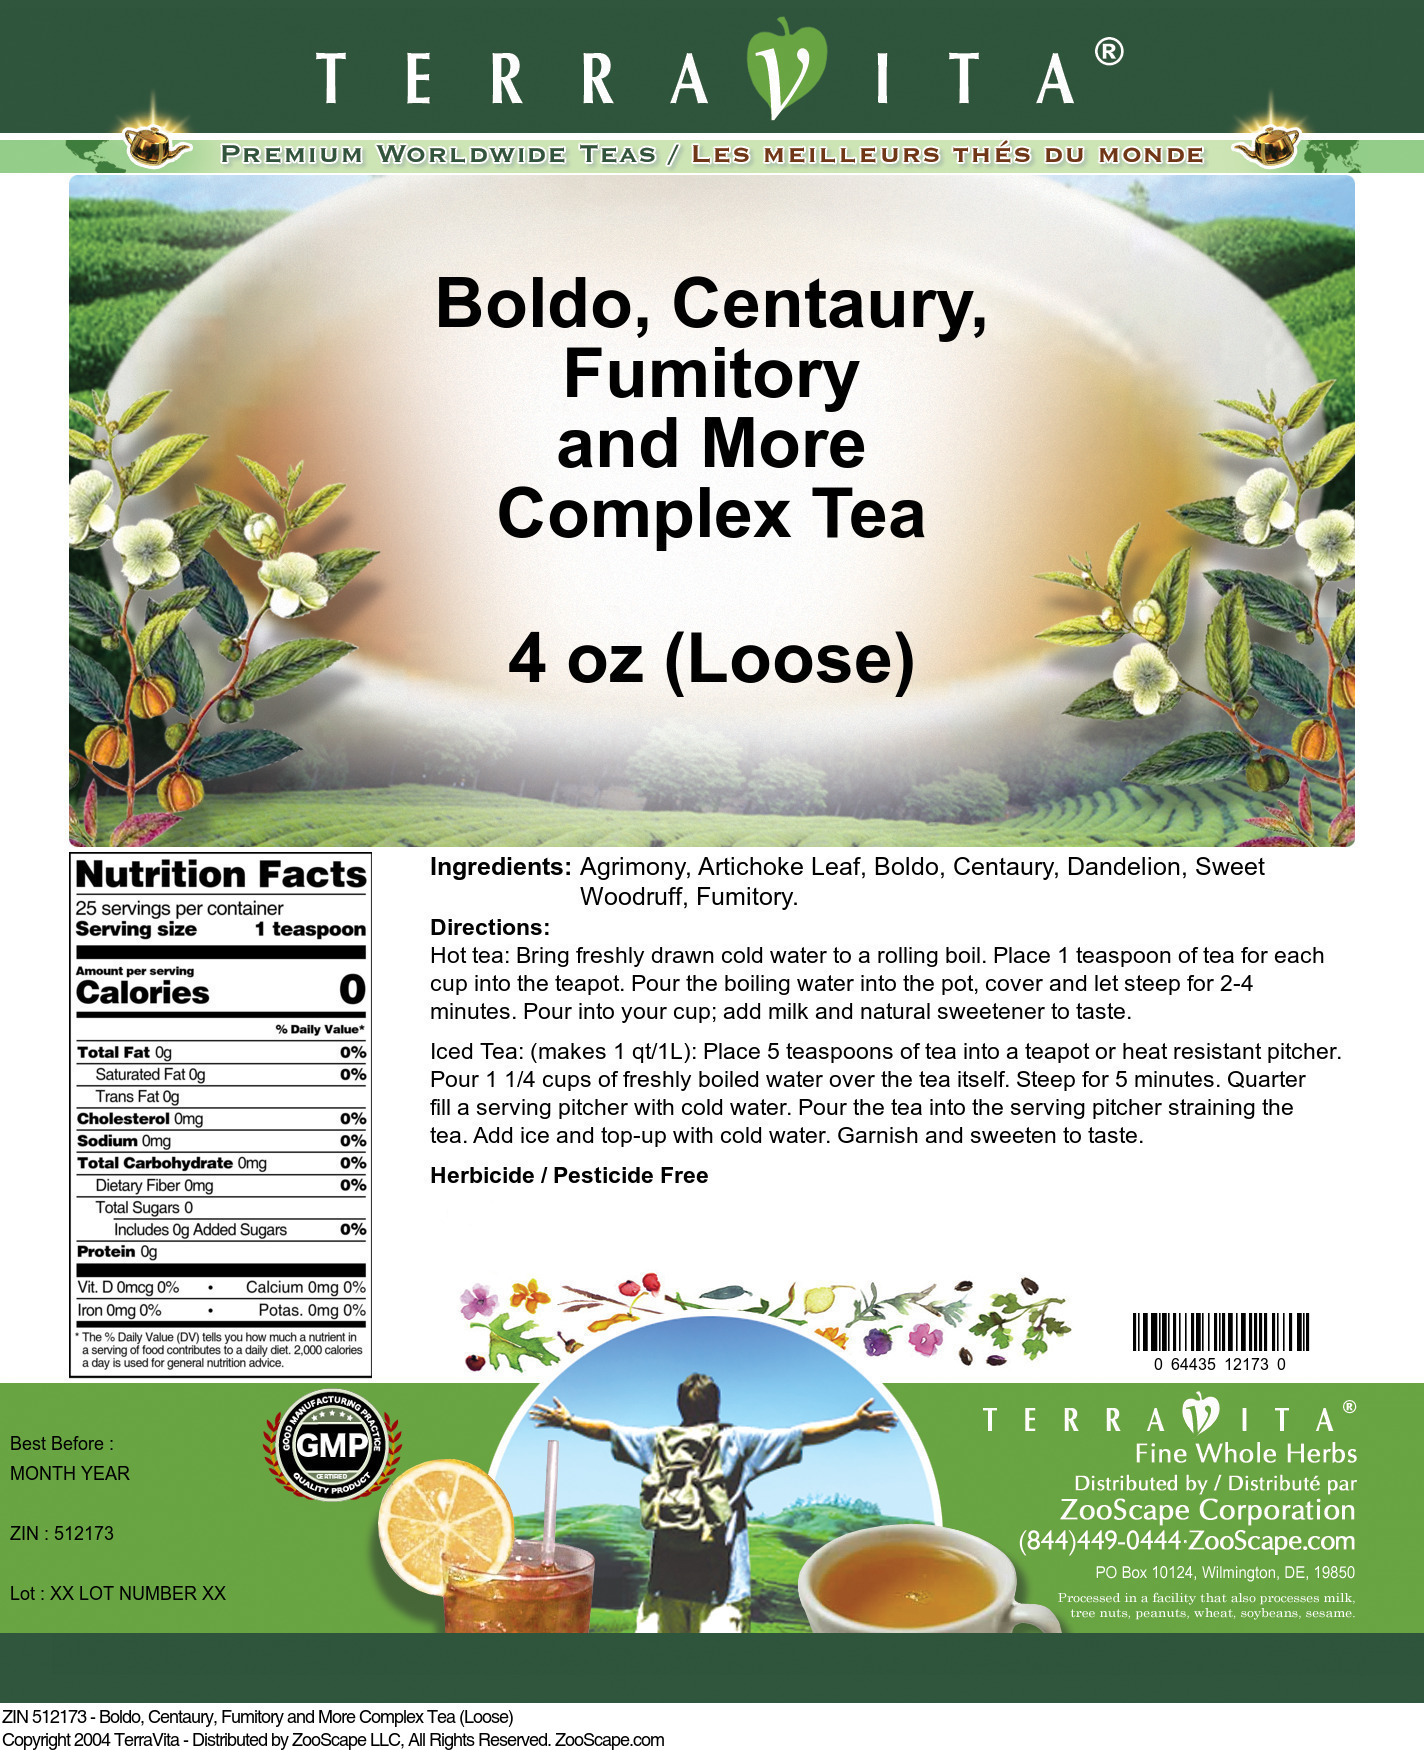 Boldo, Centaury, Fumitory and More Complex Tea (Loose) - Label